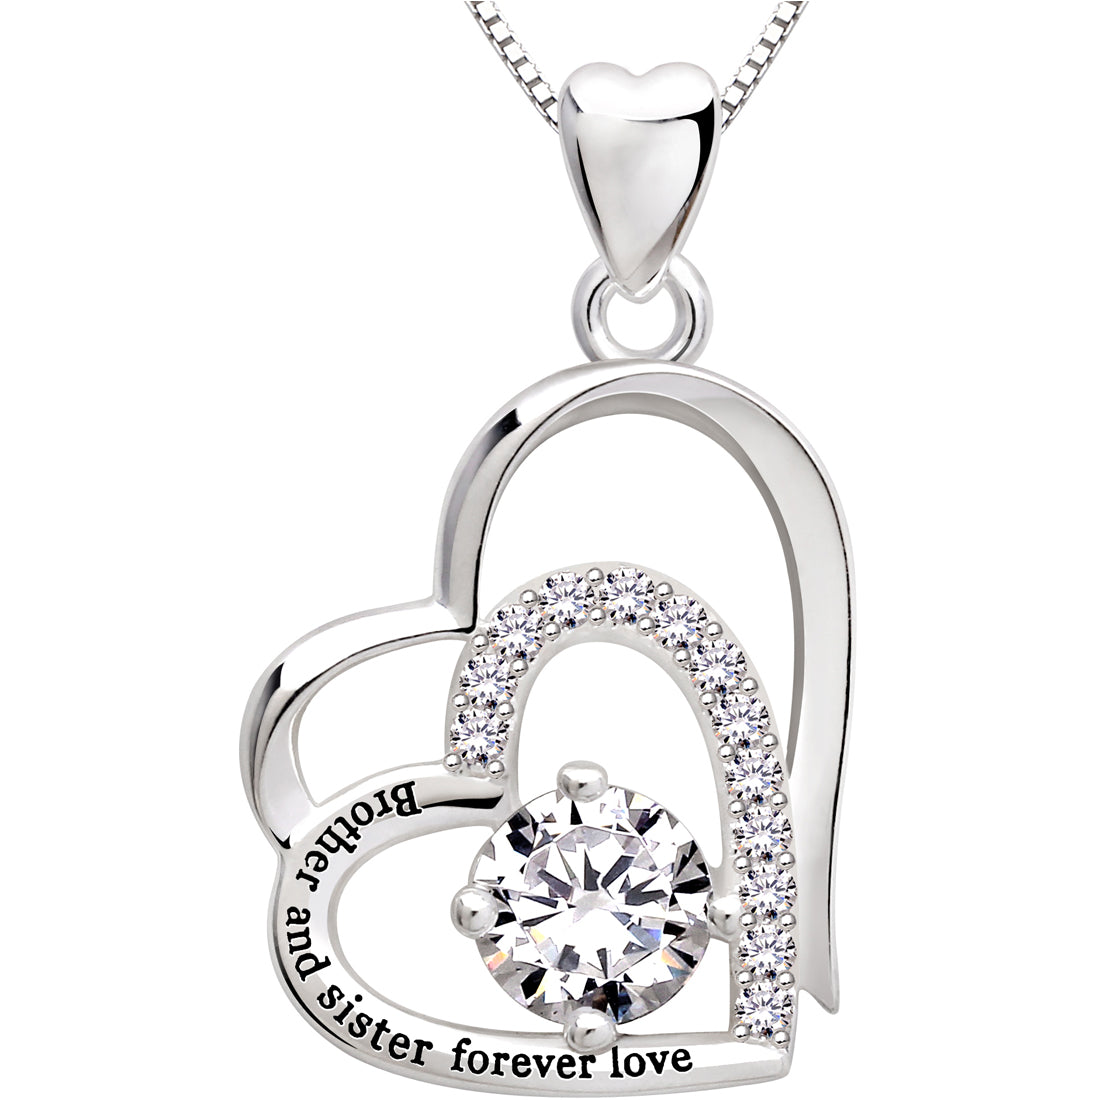 ALOV Jewelry Sterling Silver "Brother and sister forever love" Double Love Heart Cubic Zirconia Pendant Necklace